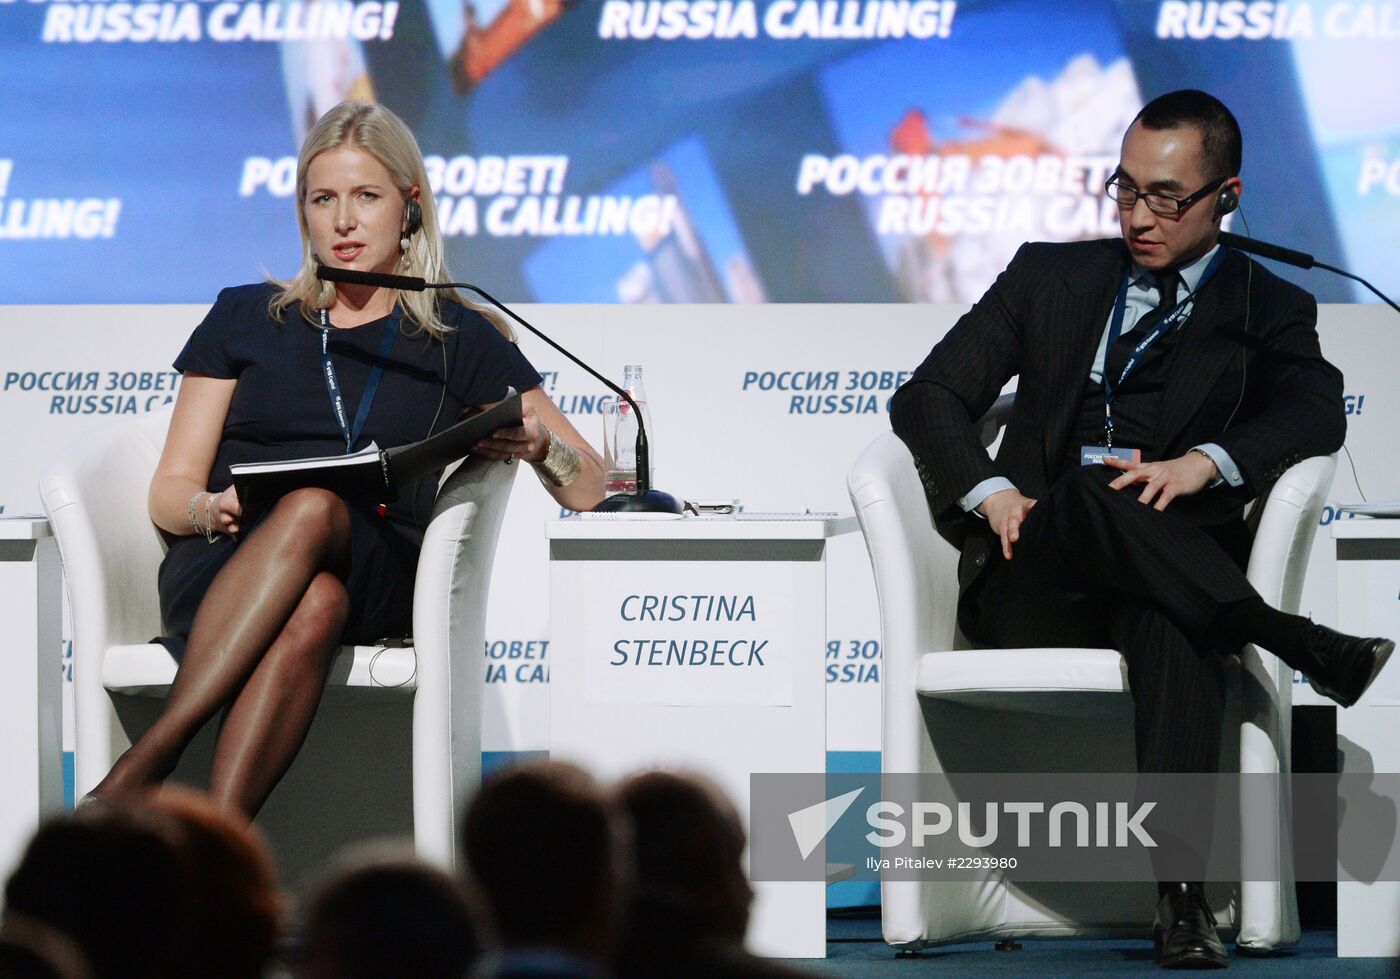 VTB Capital "Russia Calling!" forum. Day Two